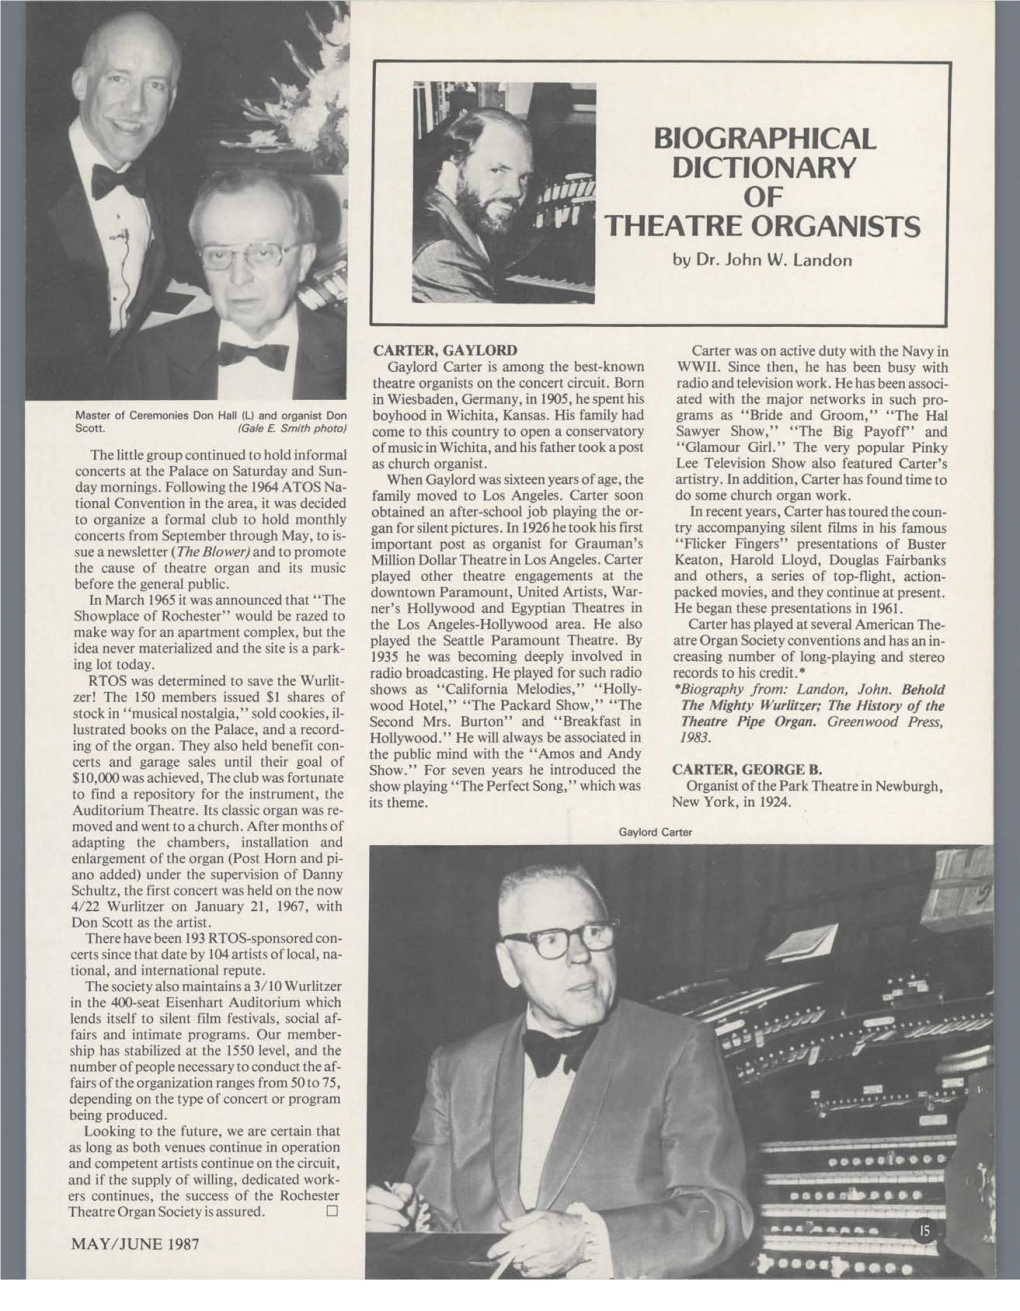 BIOGRAPHICAL DICTIONARY of THEATRE ORGANISTS by Dr